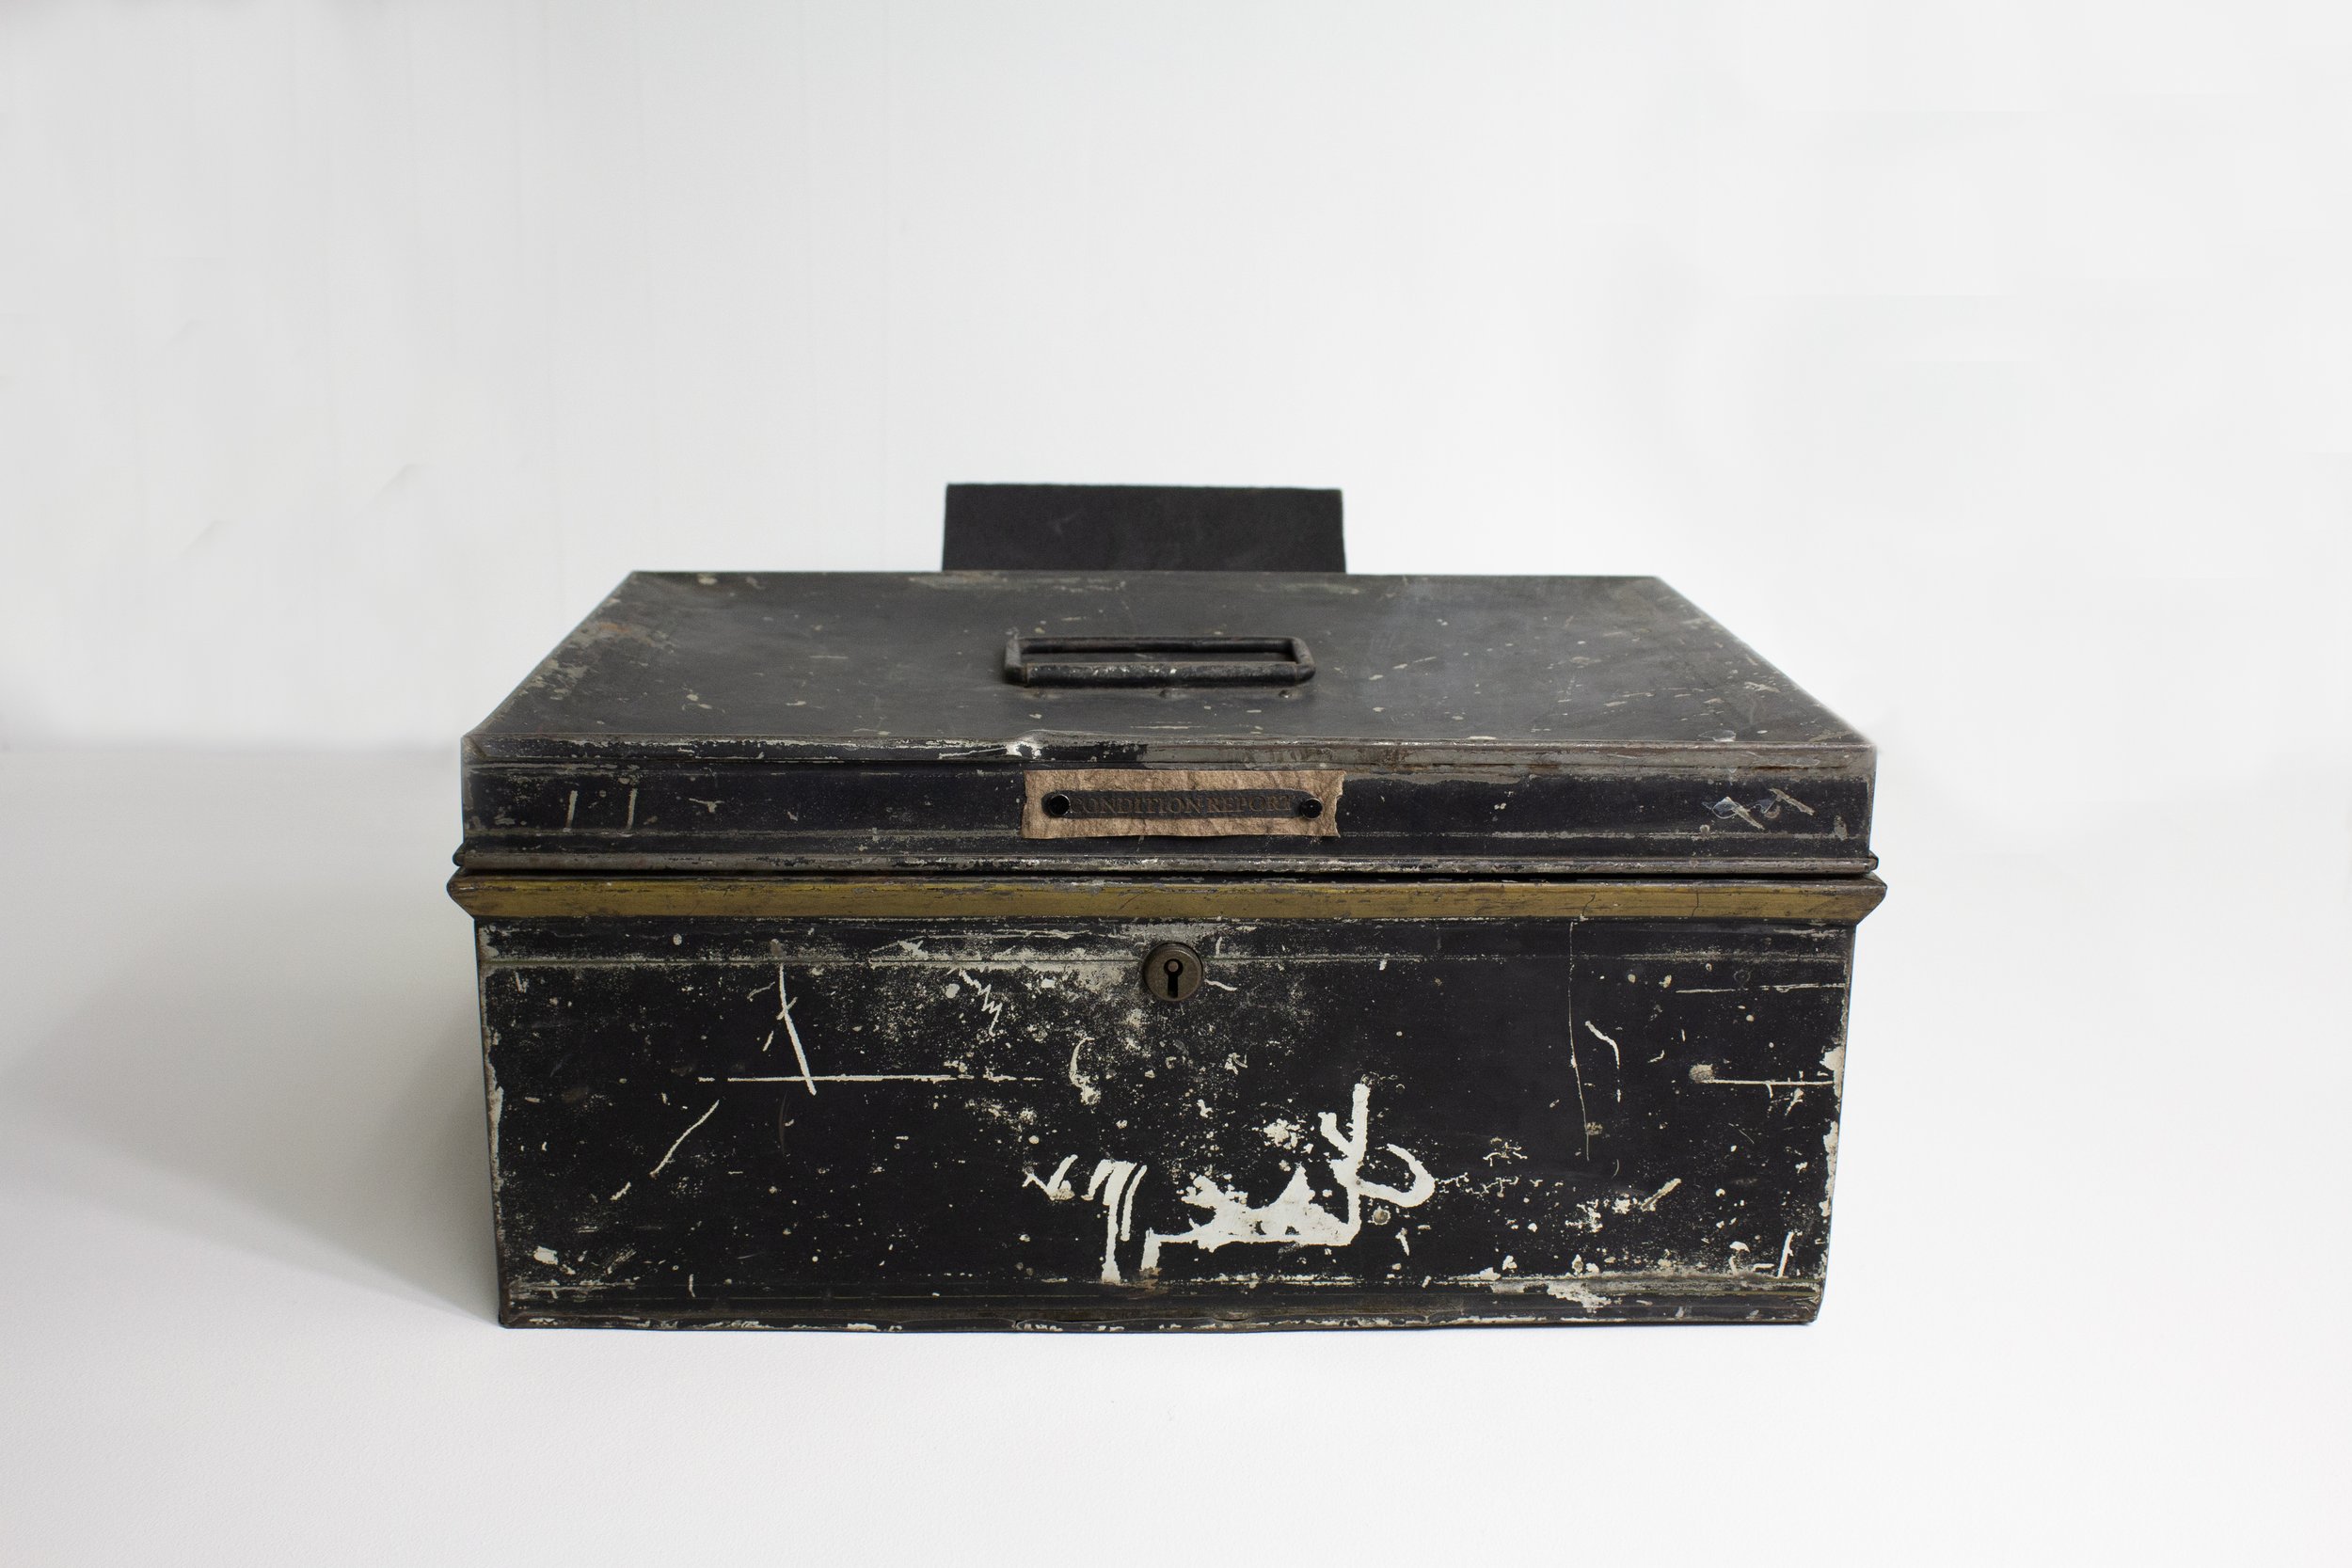 Early 20th century document box which houses book and objects